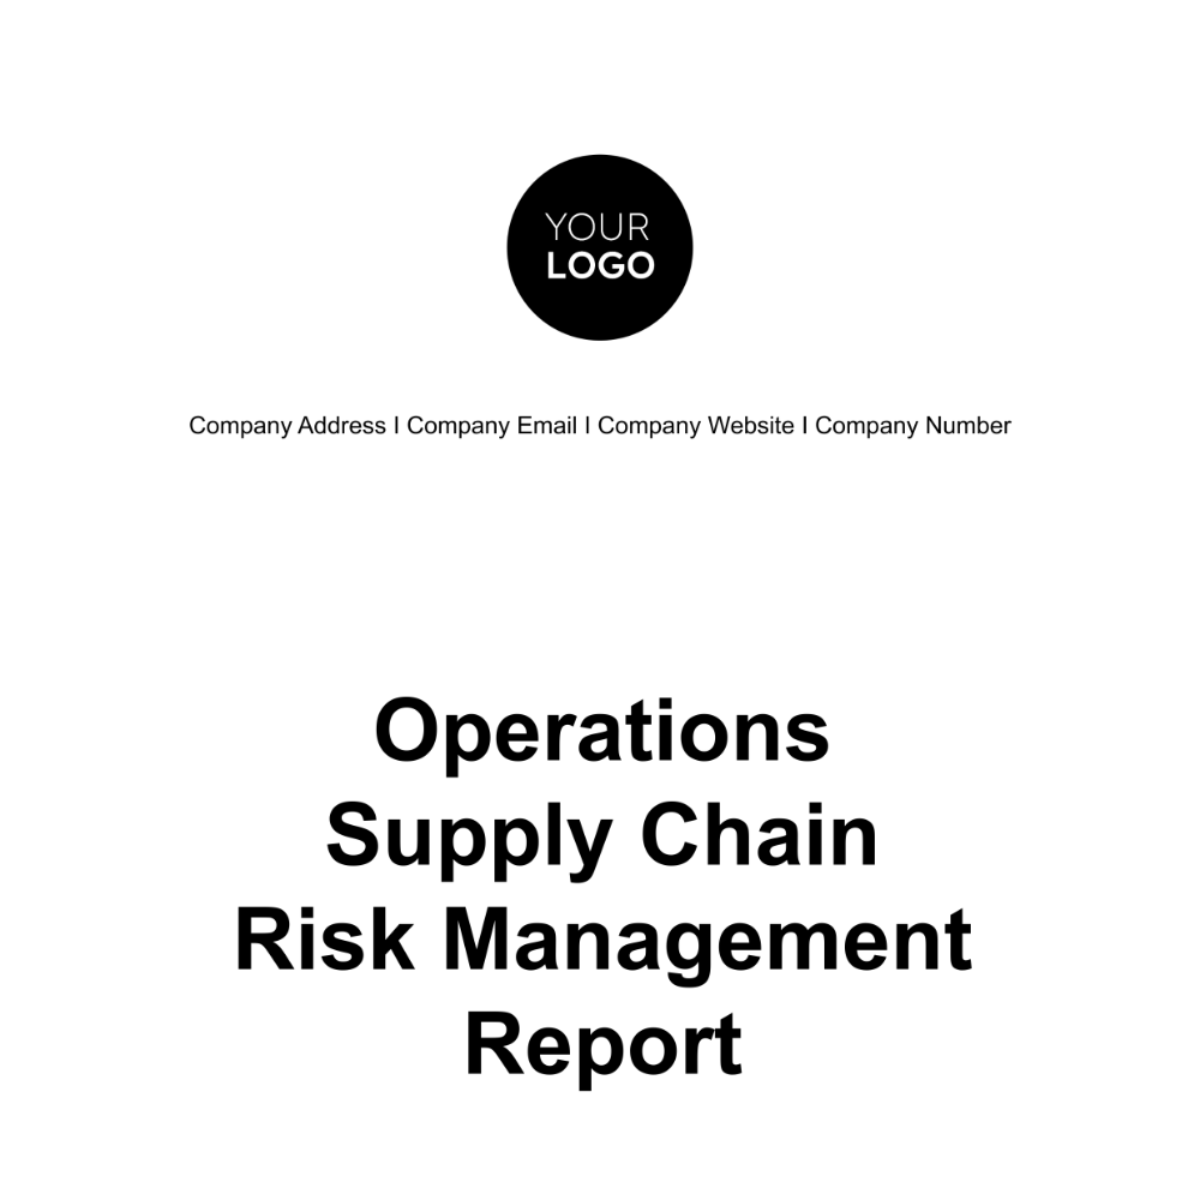 Operations Supply Chain Risk Management Report Template